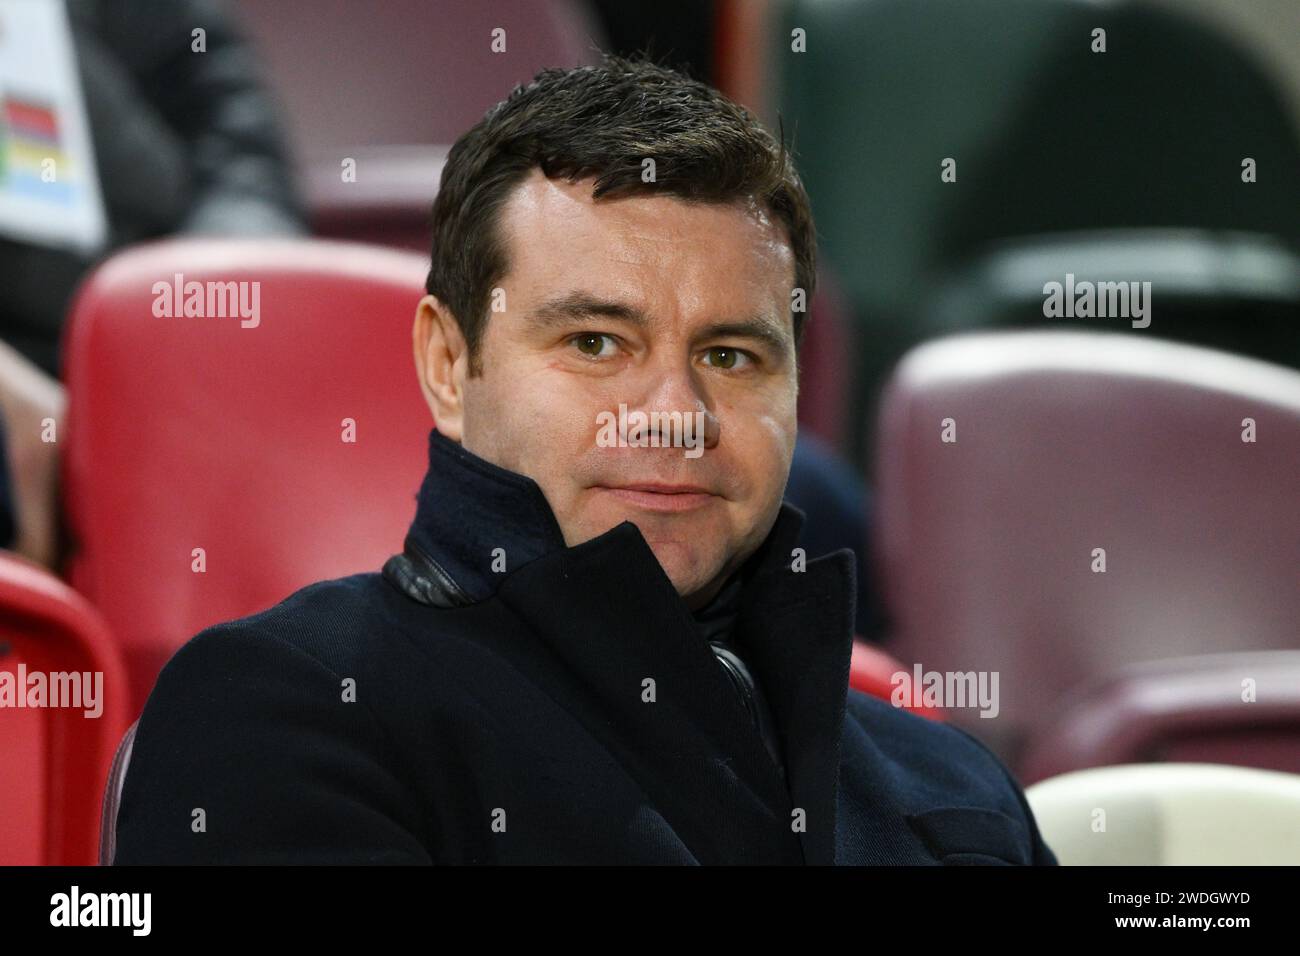 Brentford on Saturday 20th January 2024. Ross Wilson, Nottingham Forest sporting director during the Premier League match between Brentford and Nottingham Forest at the Gtech Community Stadium, Brentford on Saturday 20th January 2024. (Photo: Jon Hobley | MI News) Credit: MI News & Sport /Alamy Live News Stock Photo